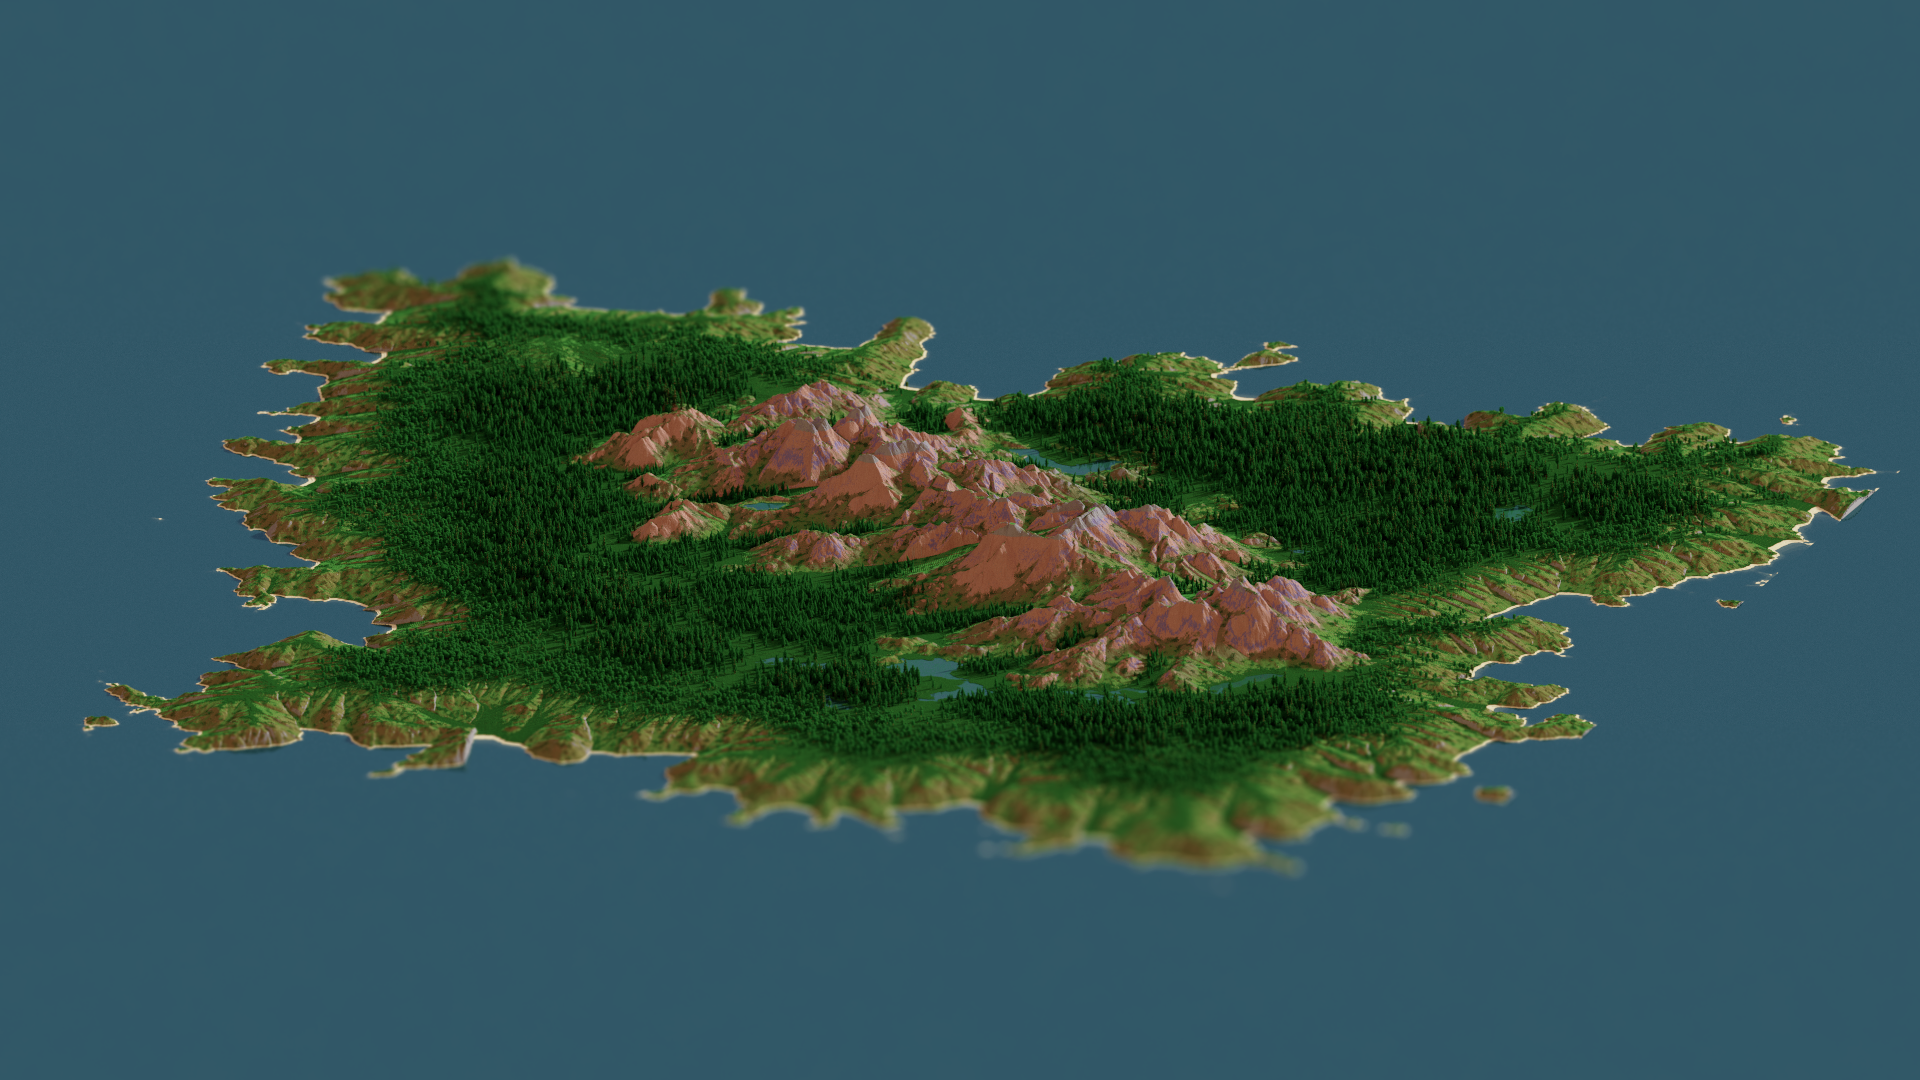 General 1920x1080 Minecraft CGI Chunky island mountains forest sea lake video games PC gaming